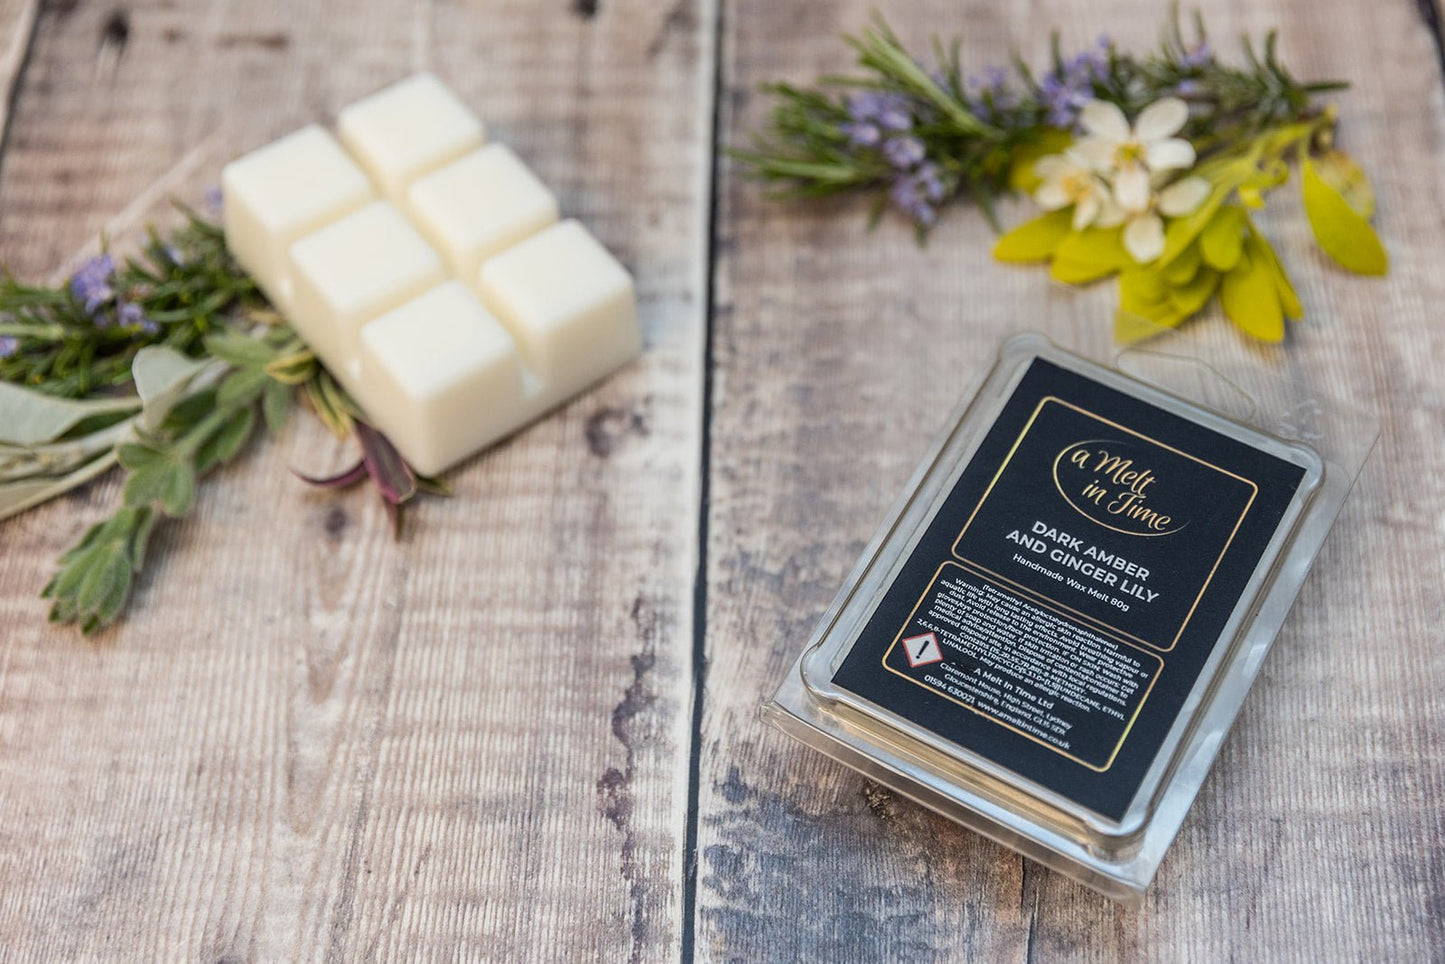 Dark Amber & Ginger Lily Wax Melts - A Melt In Time Ltd